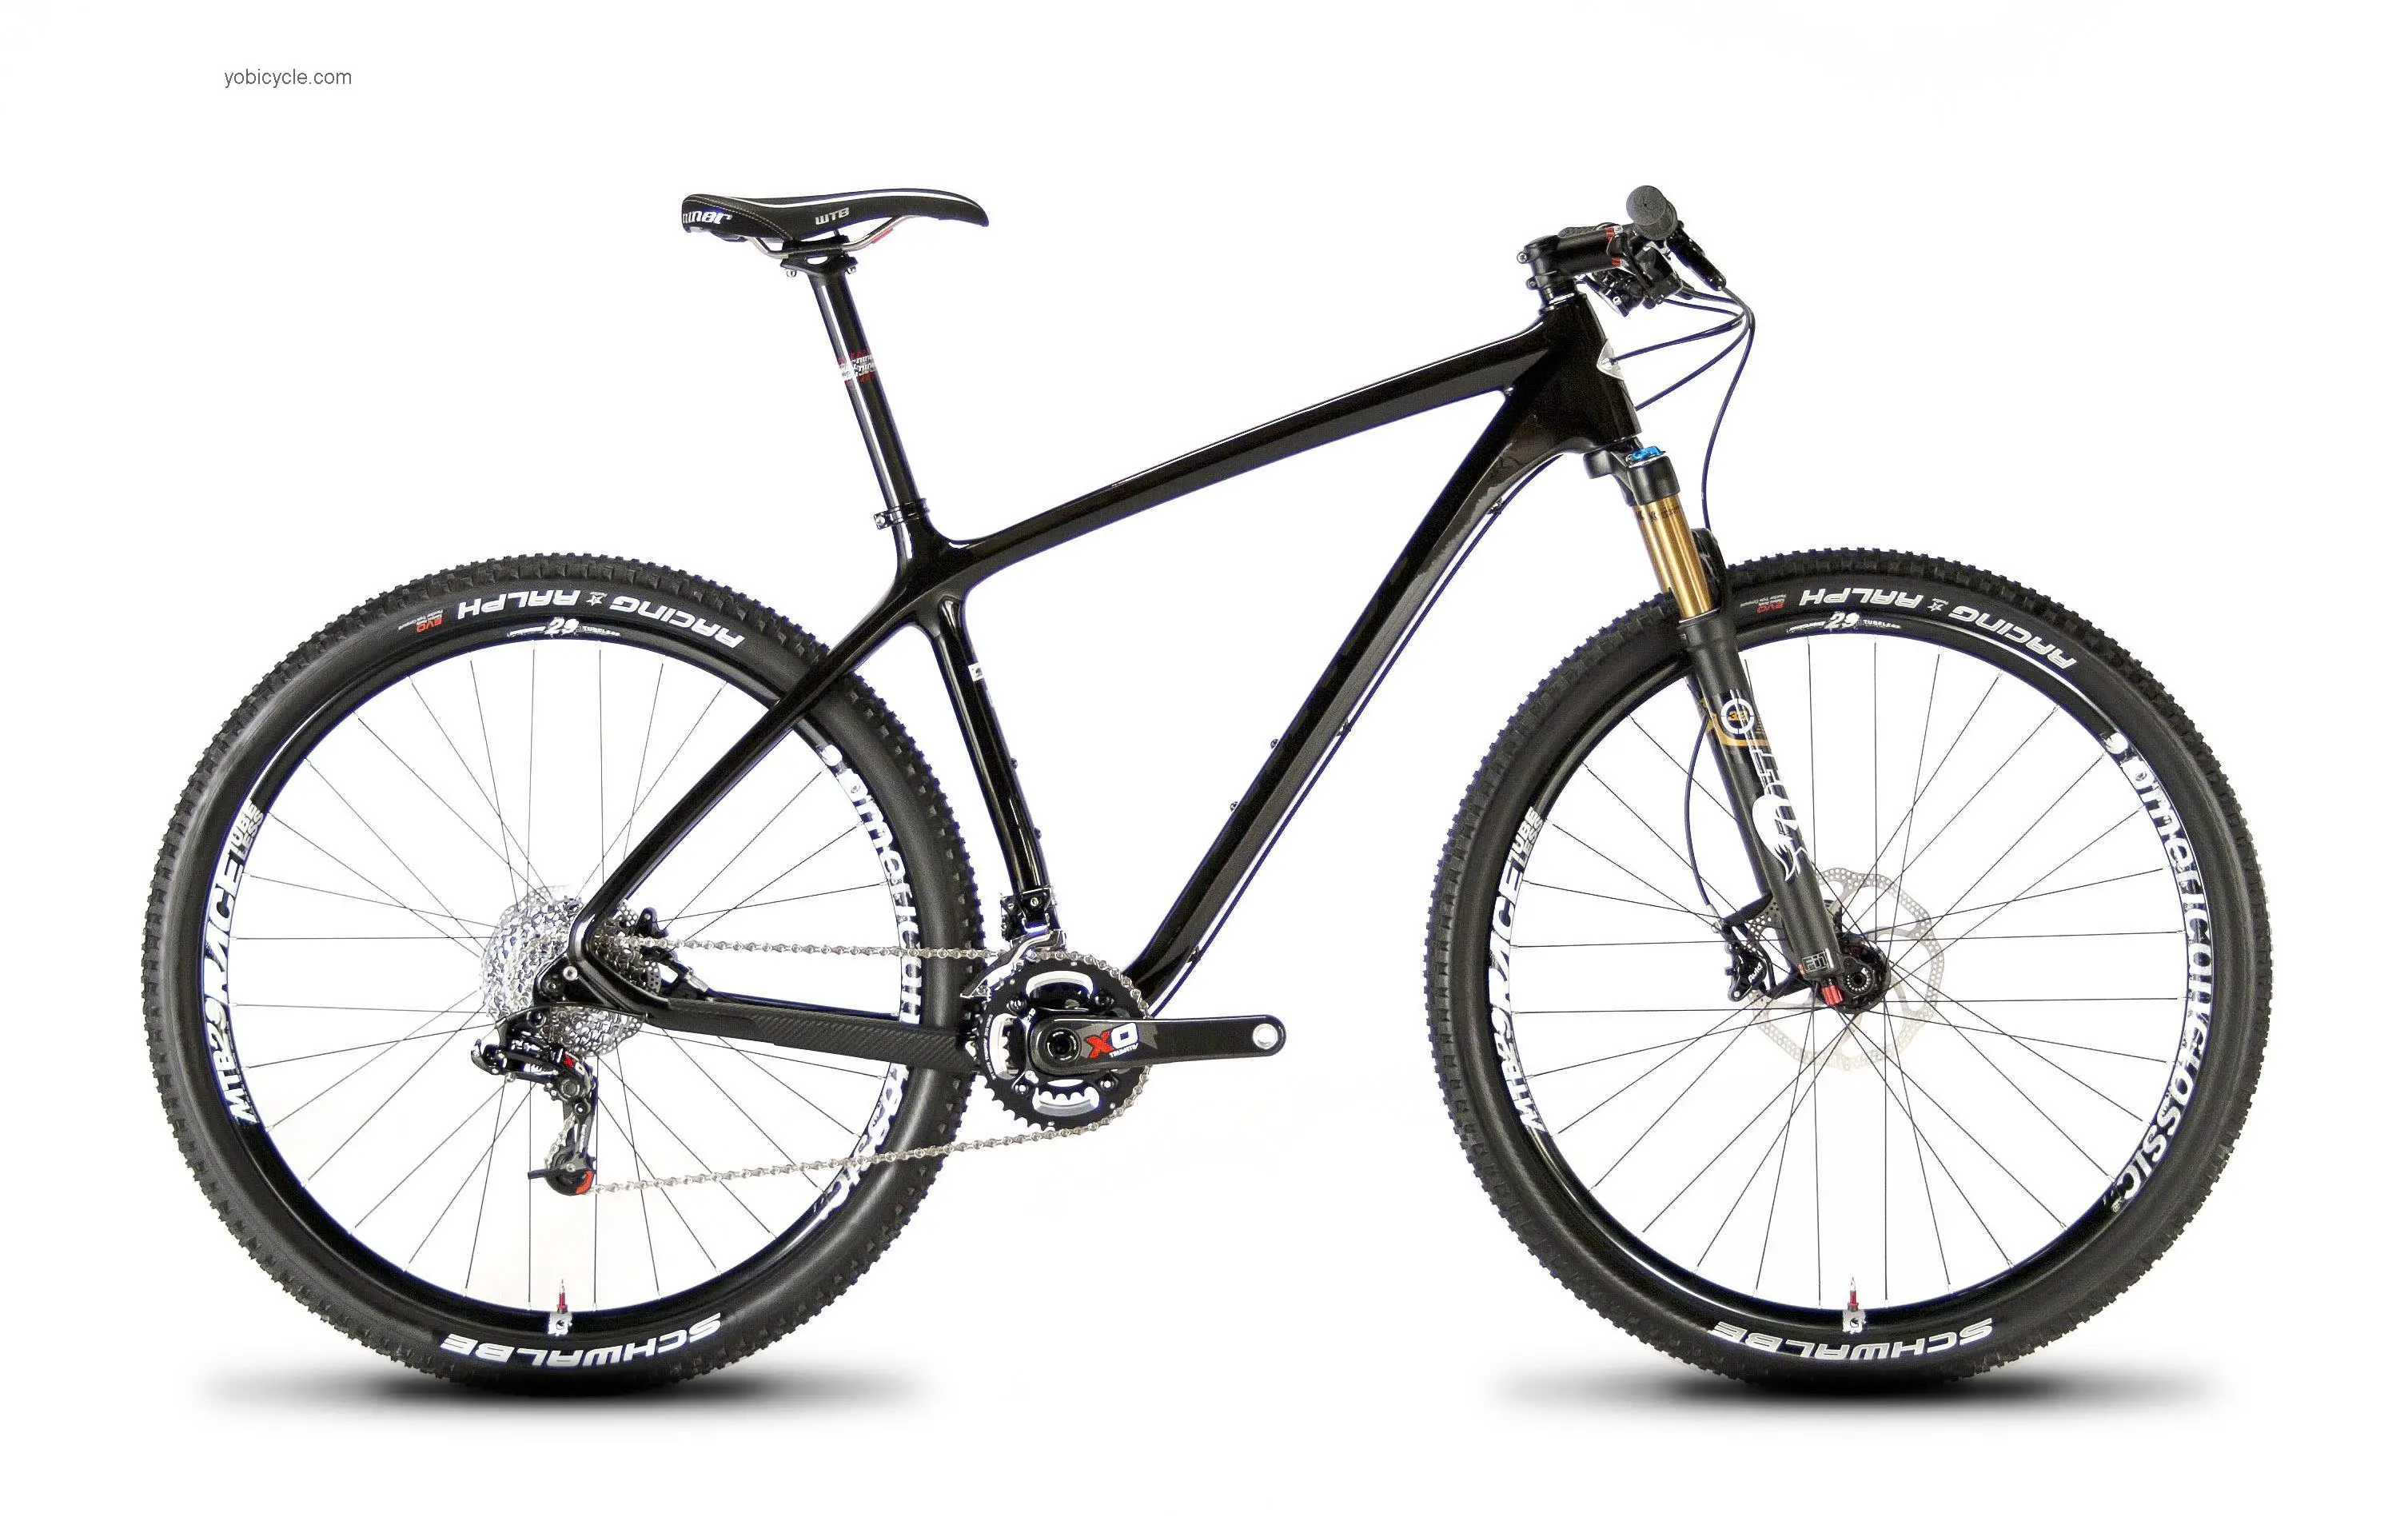 Niner Air 9 RDO X0 2013 comparison online with competitors